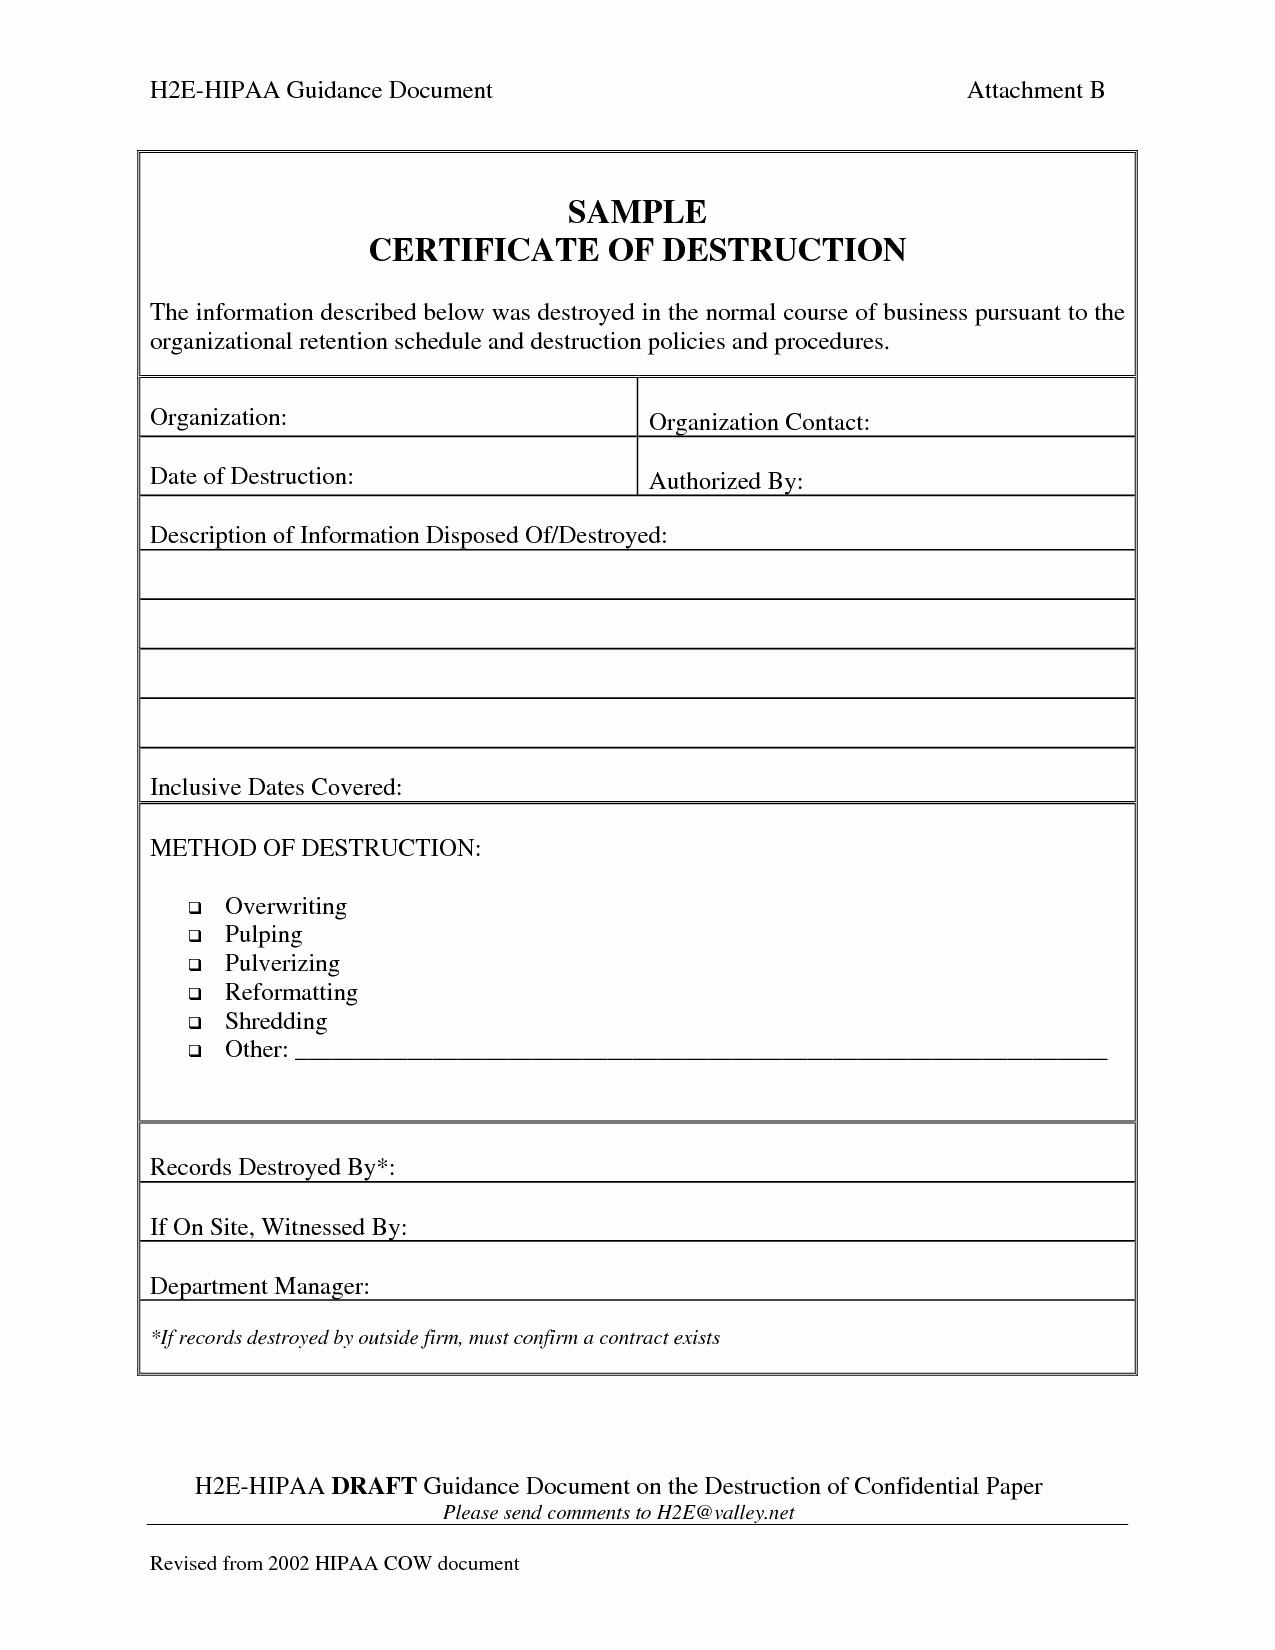 Certificate Of Destruction Template New Data Destruction Certificate Sample to Pin On